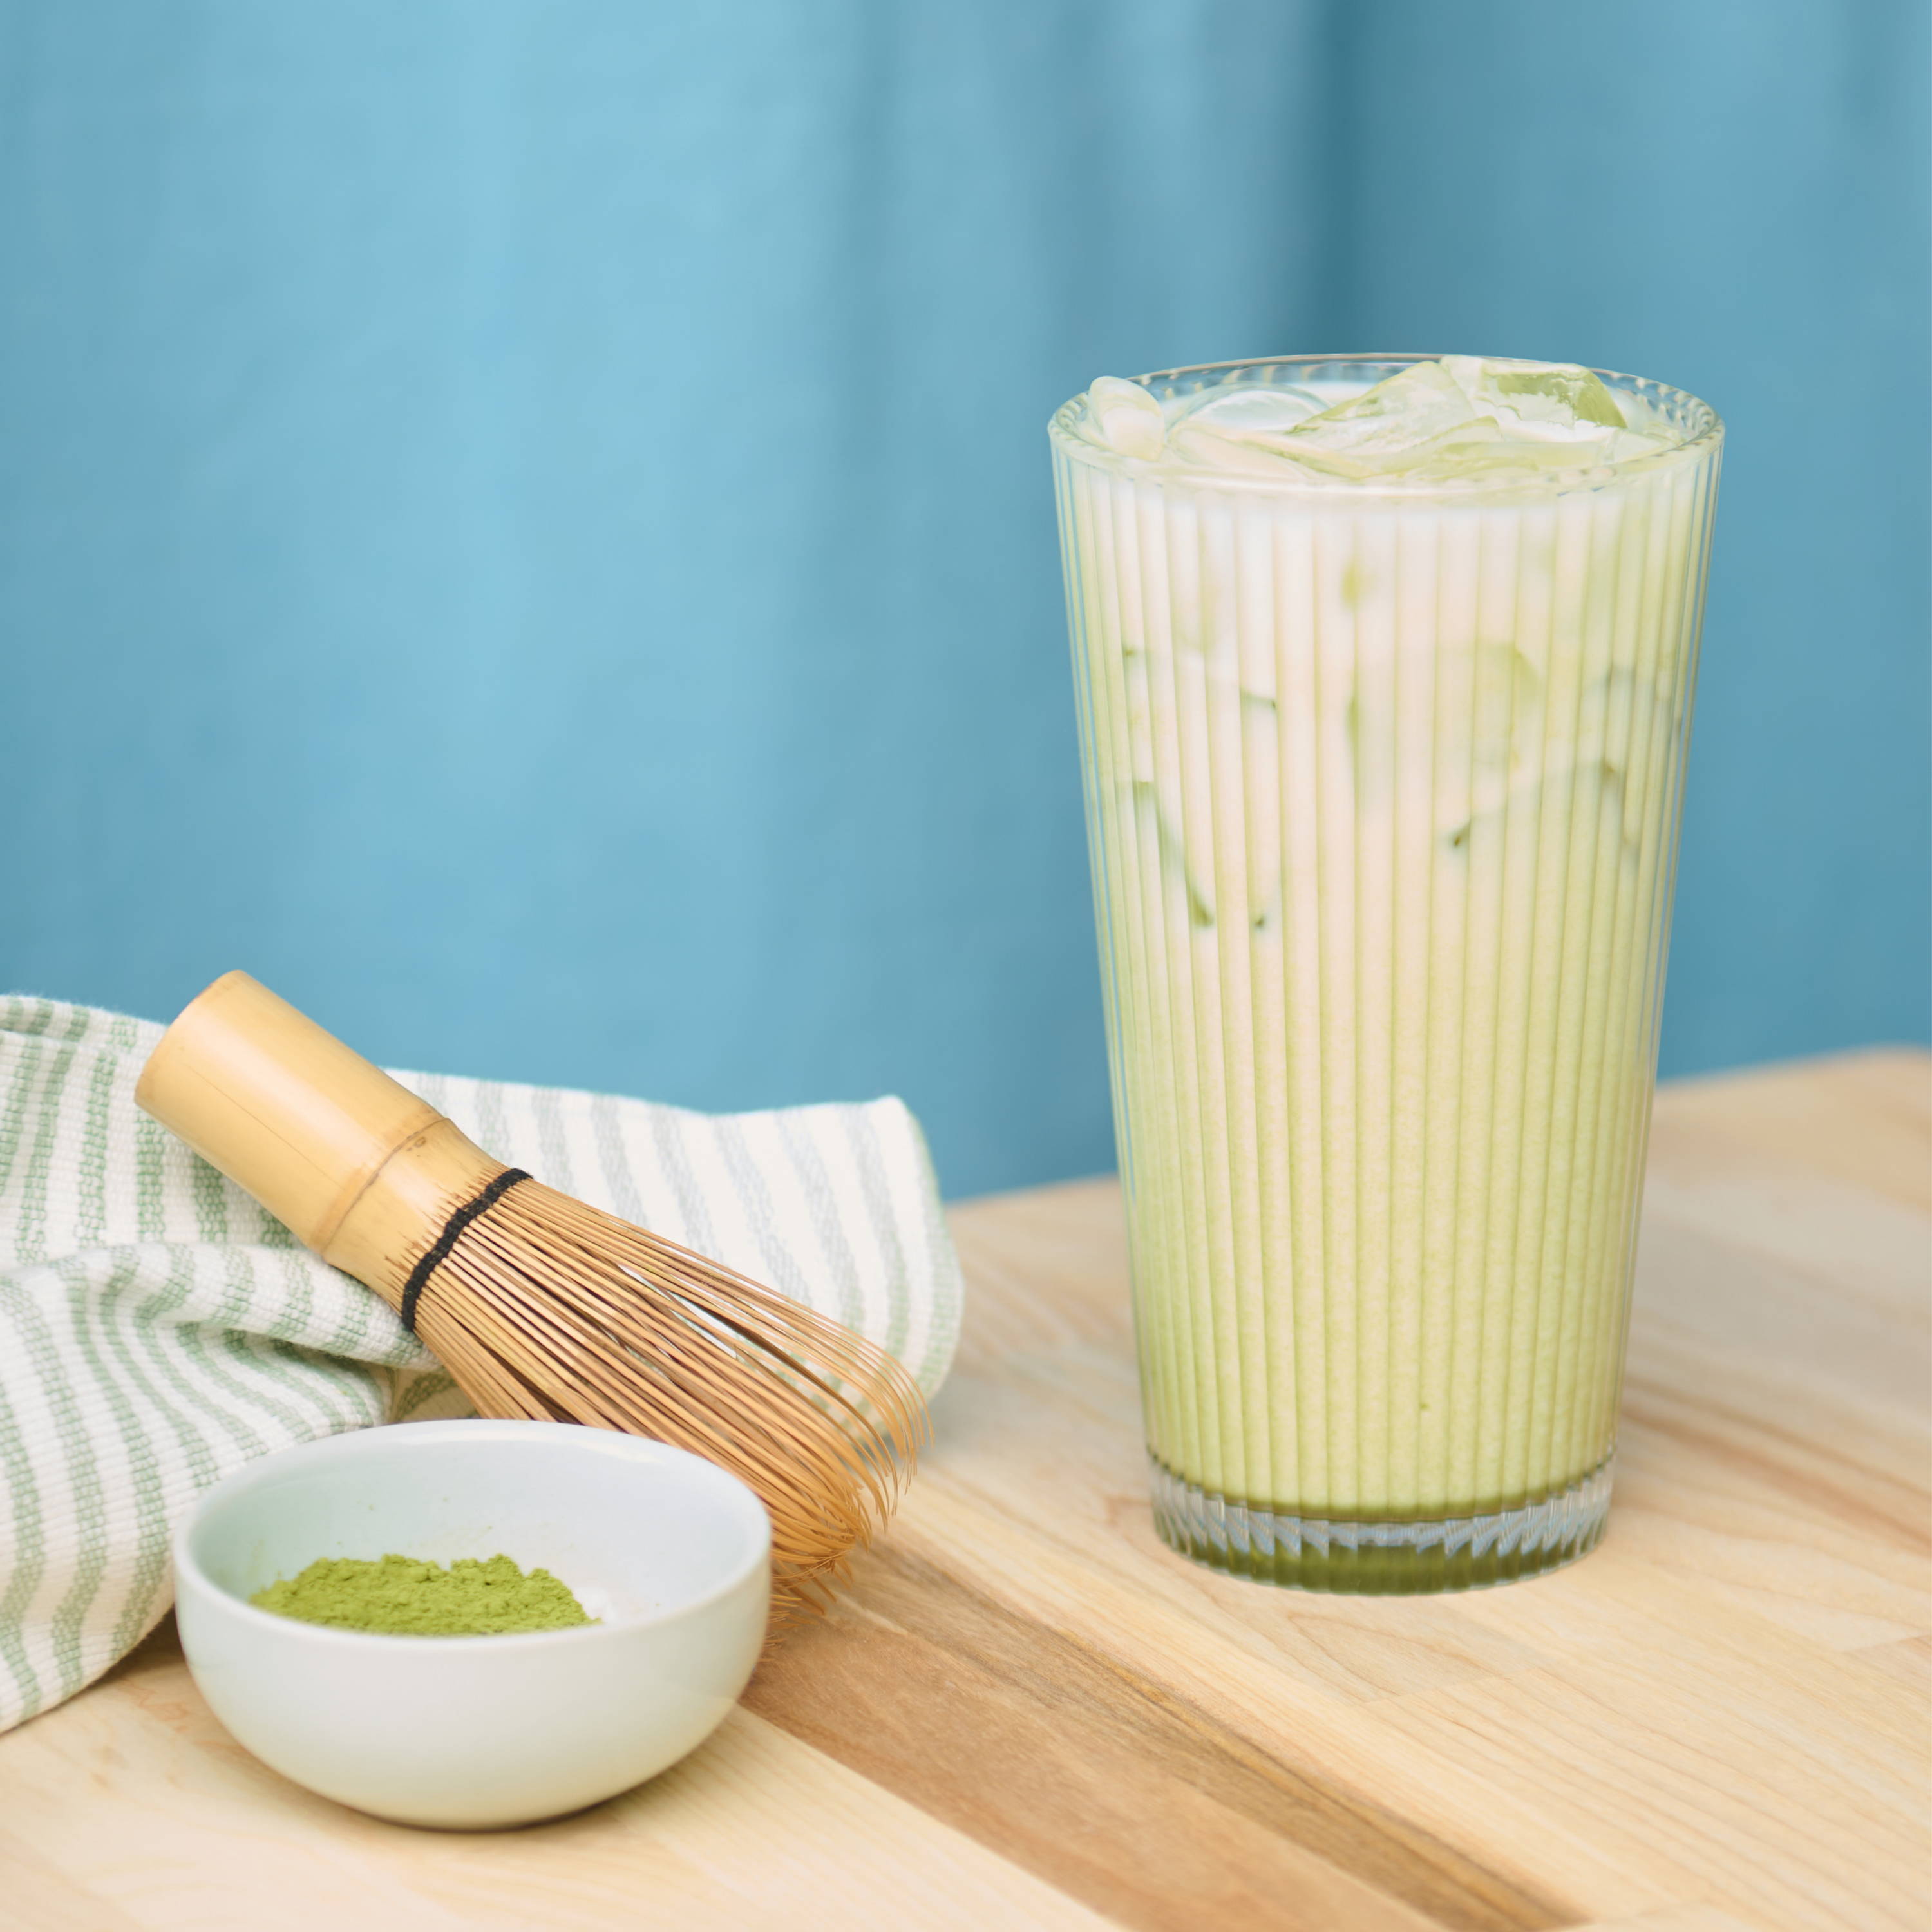 Seasonal matcha drink in glass beside match and wooden whisk